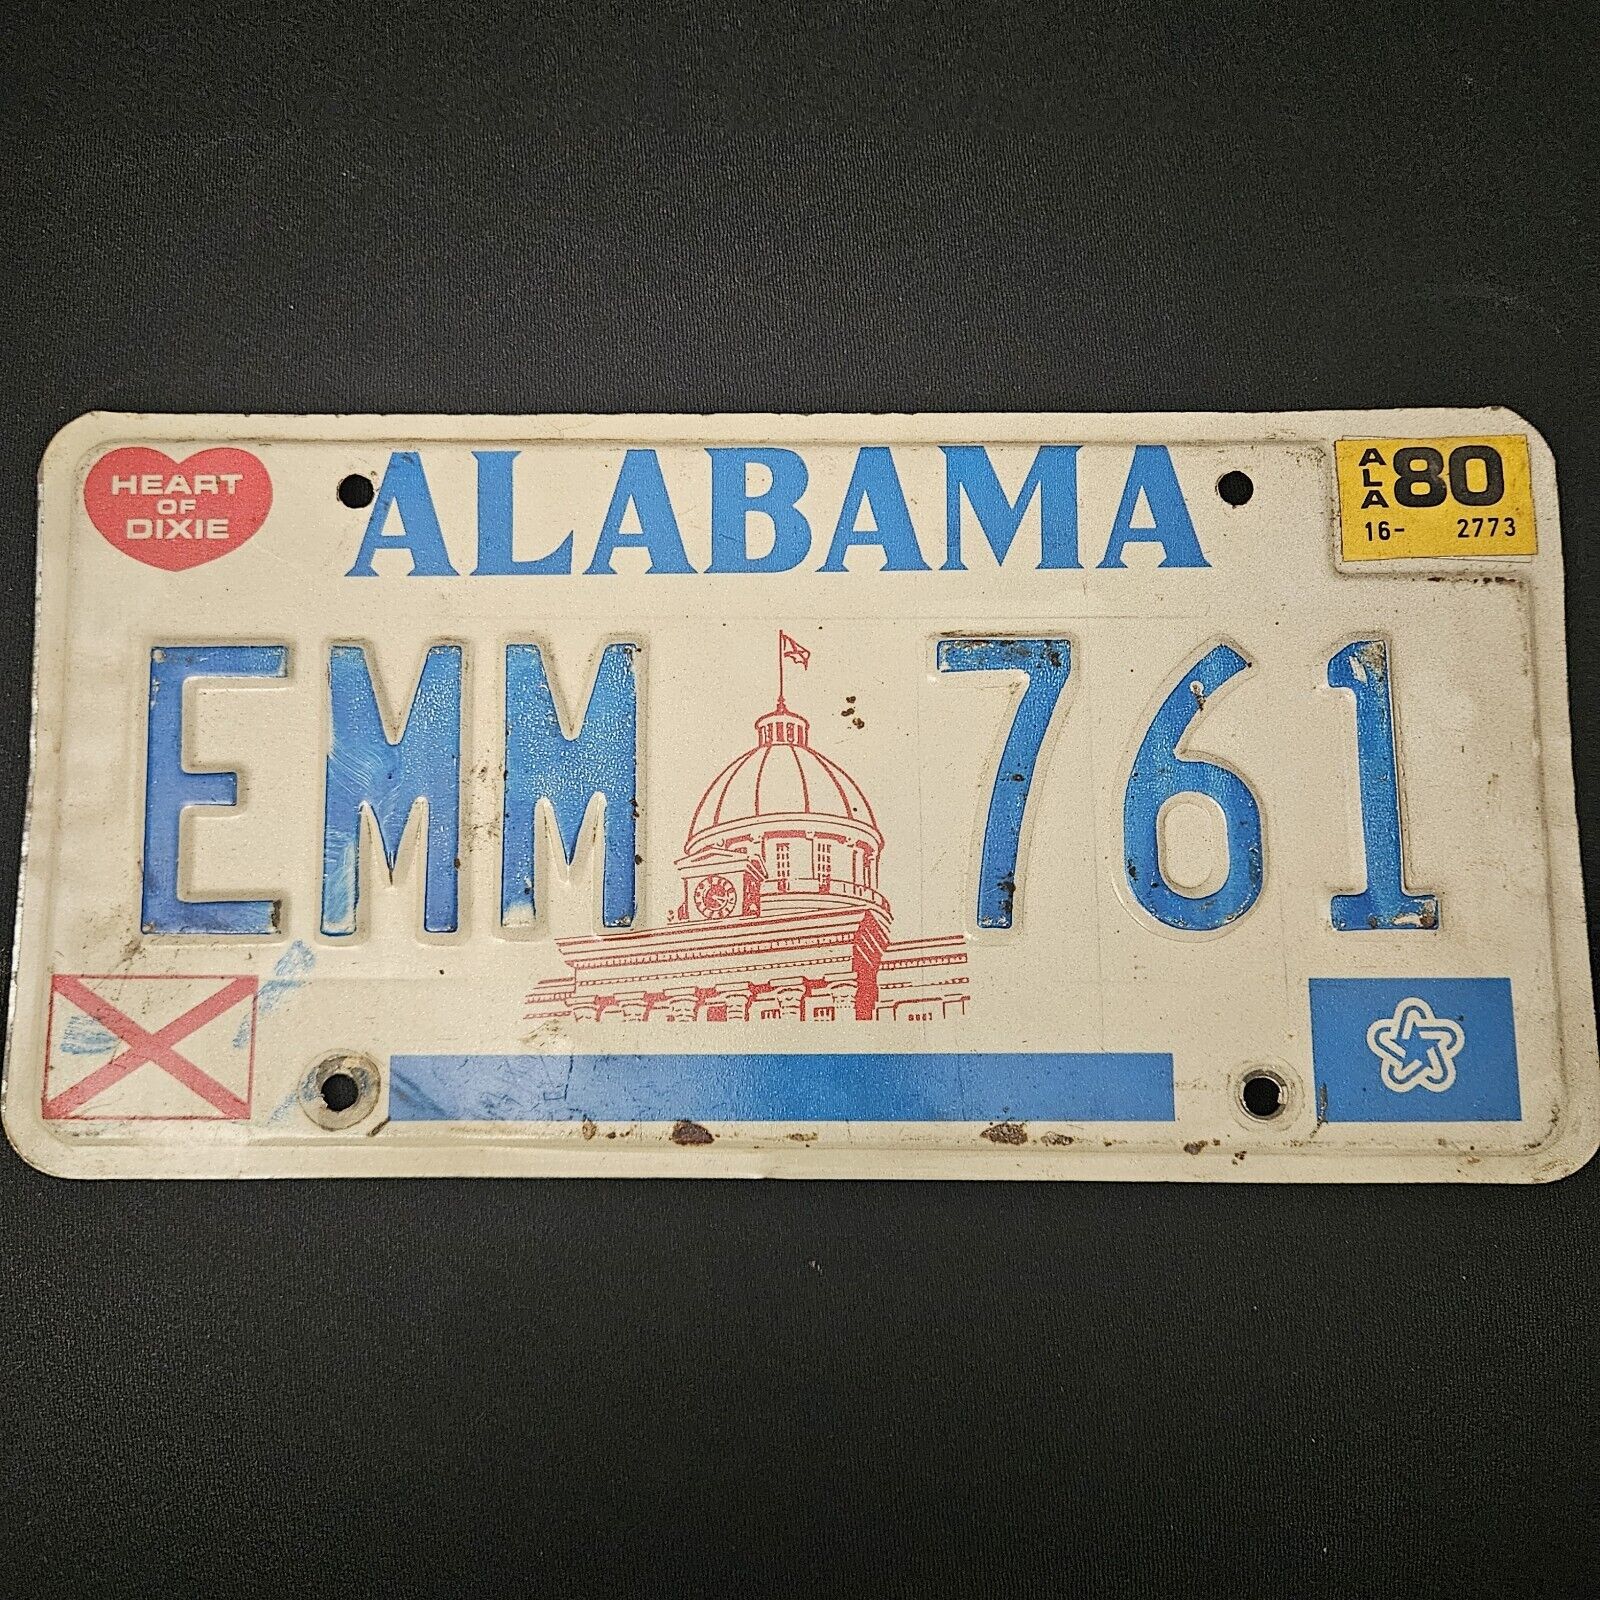 Alabama 1976 - 1981 Heart of Dixie Vintage License Plate